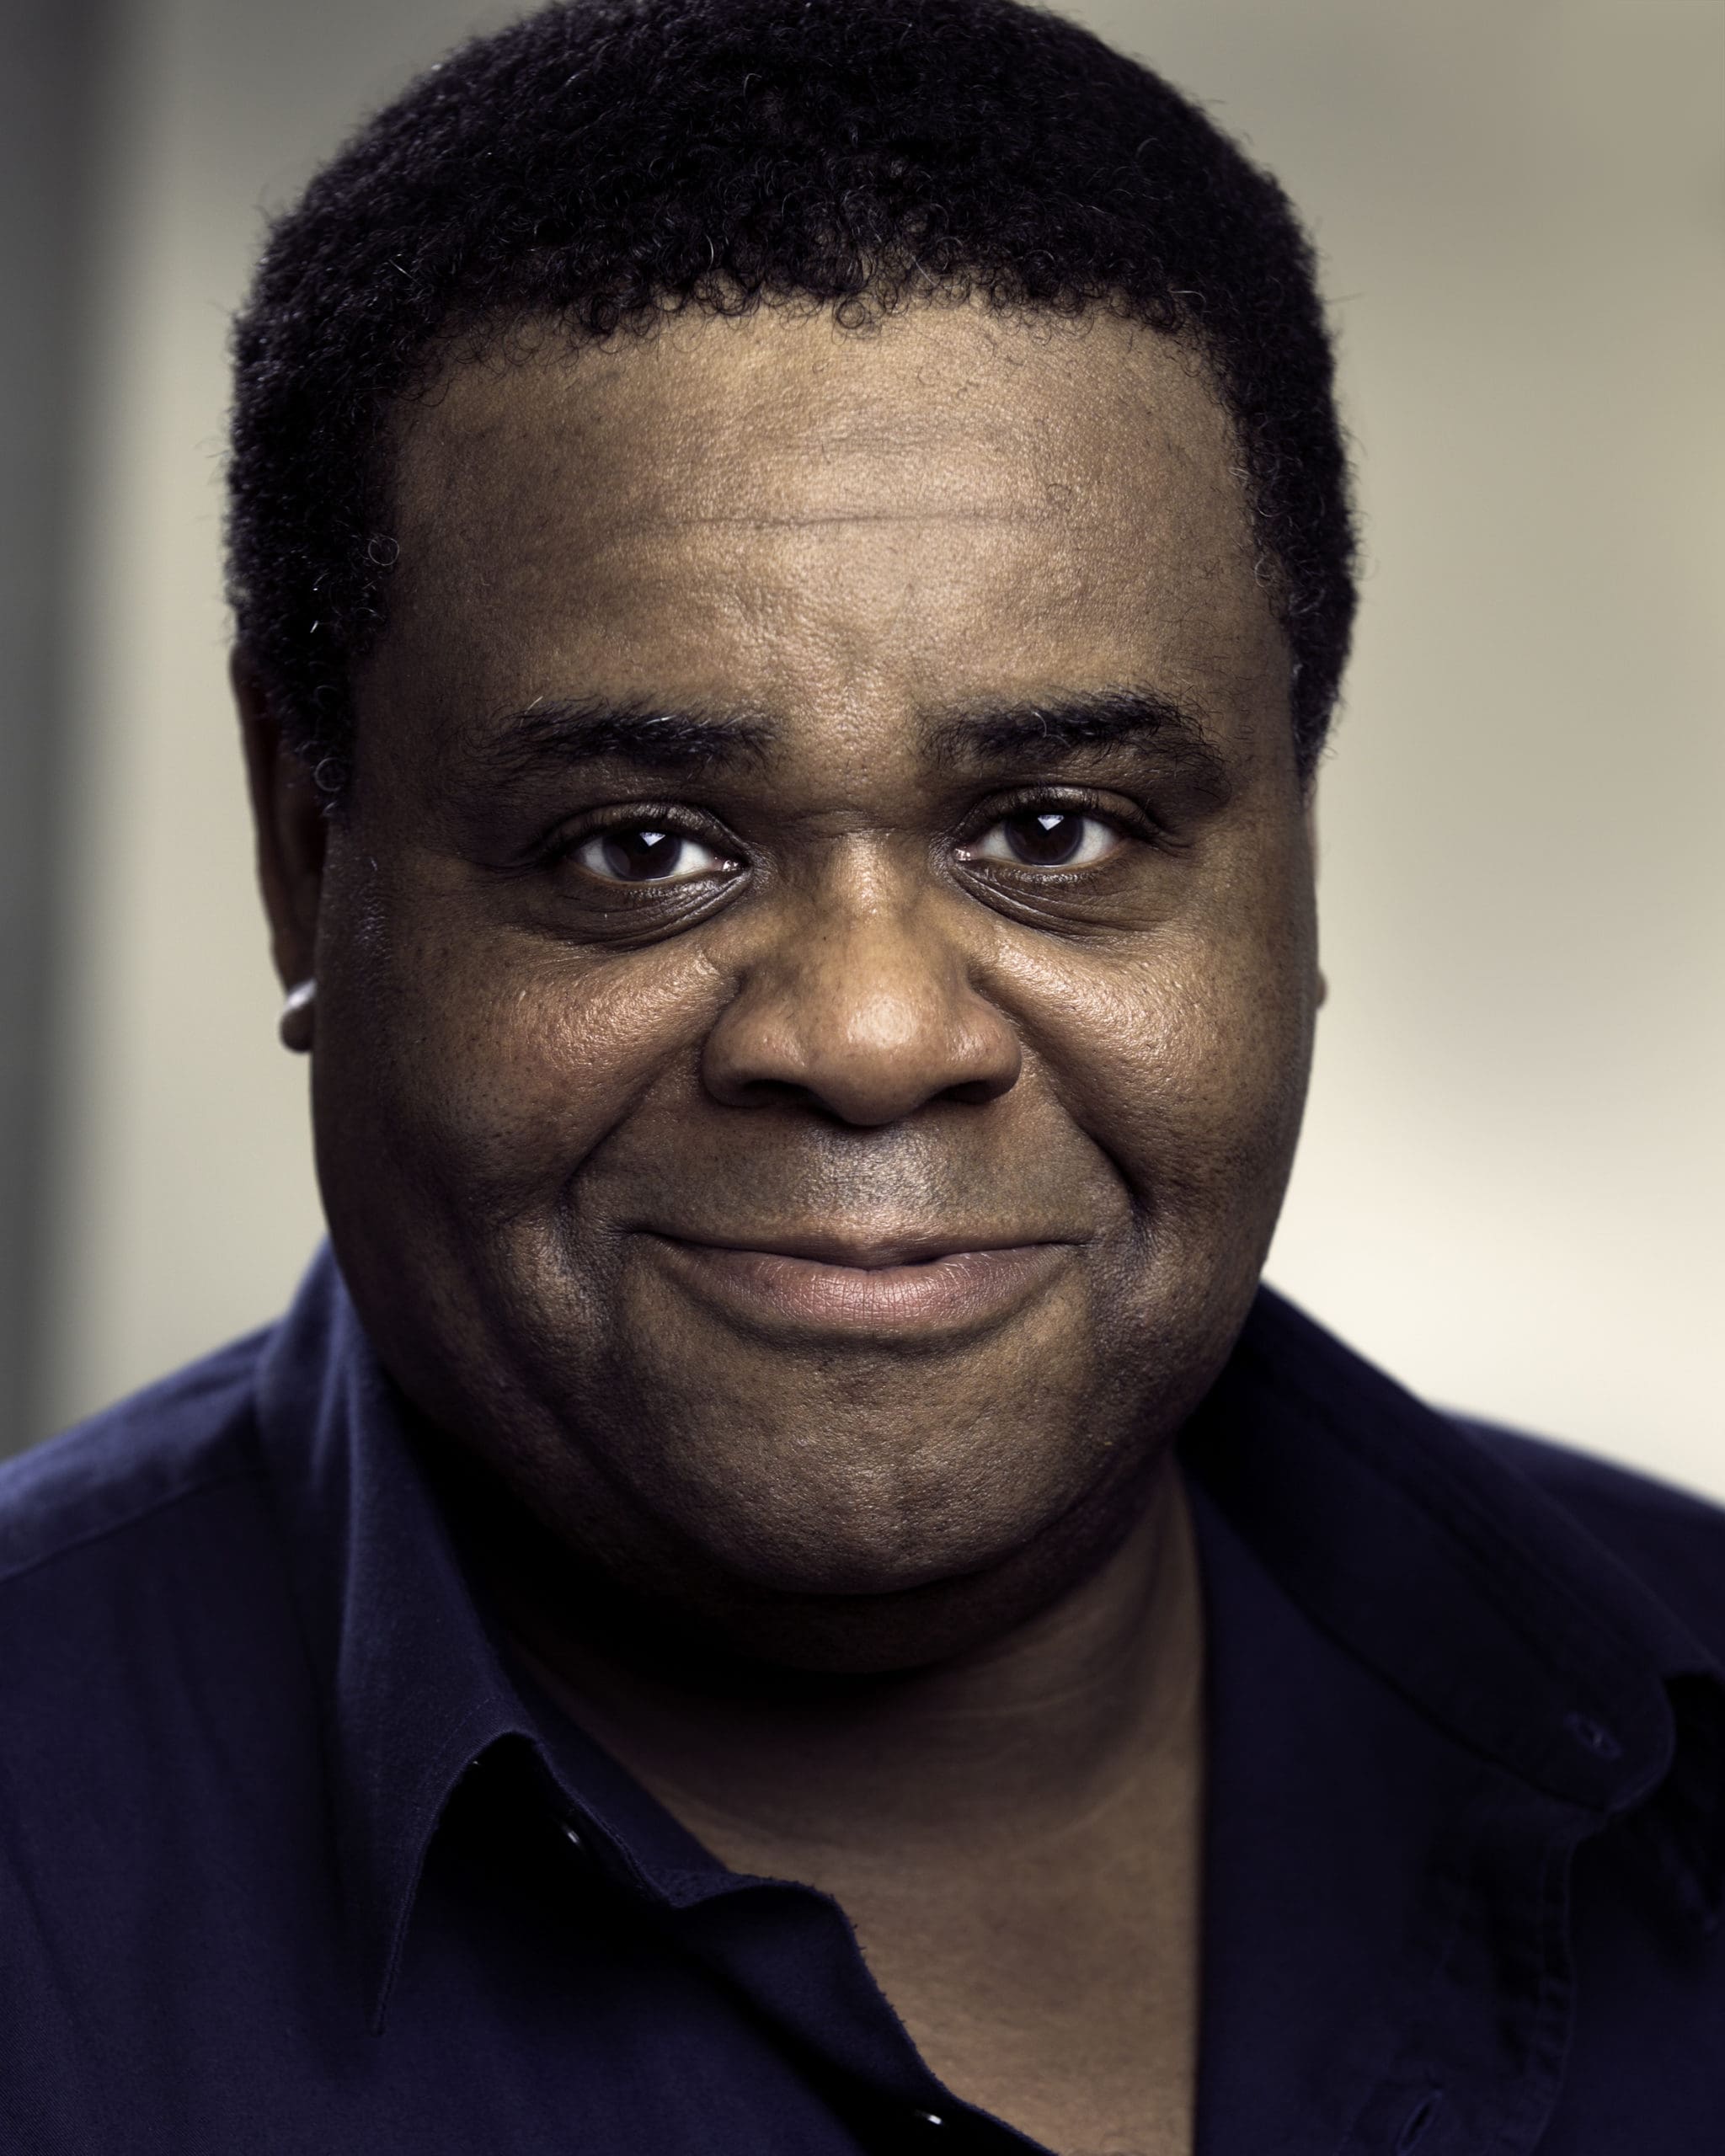 Featured image for “NEWS: CLIVE ROWE TO JOIN THE CAST OF THE SMASH HIT MUSICAL SISTER ACT”